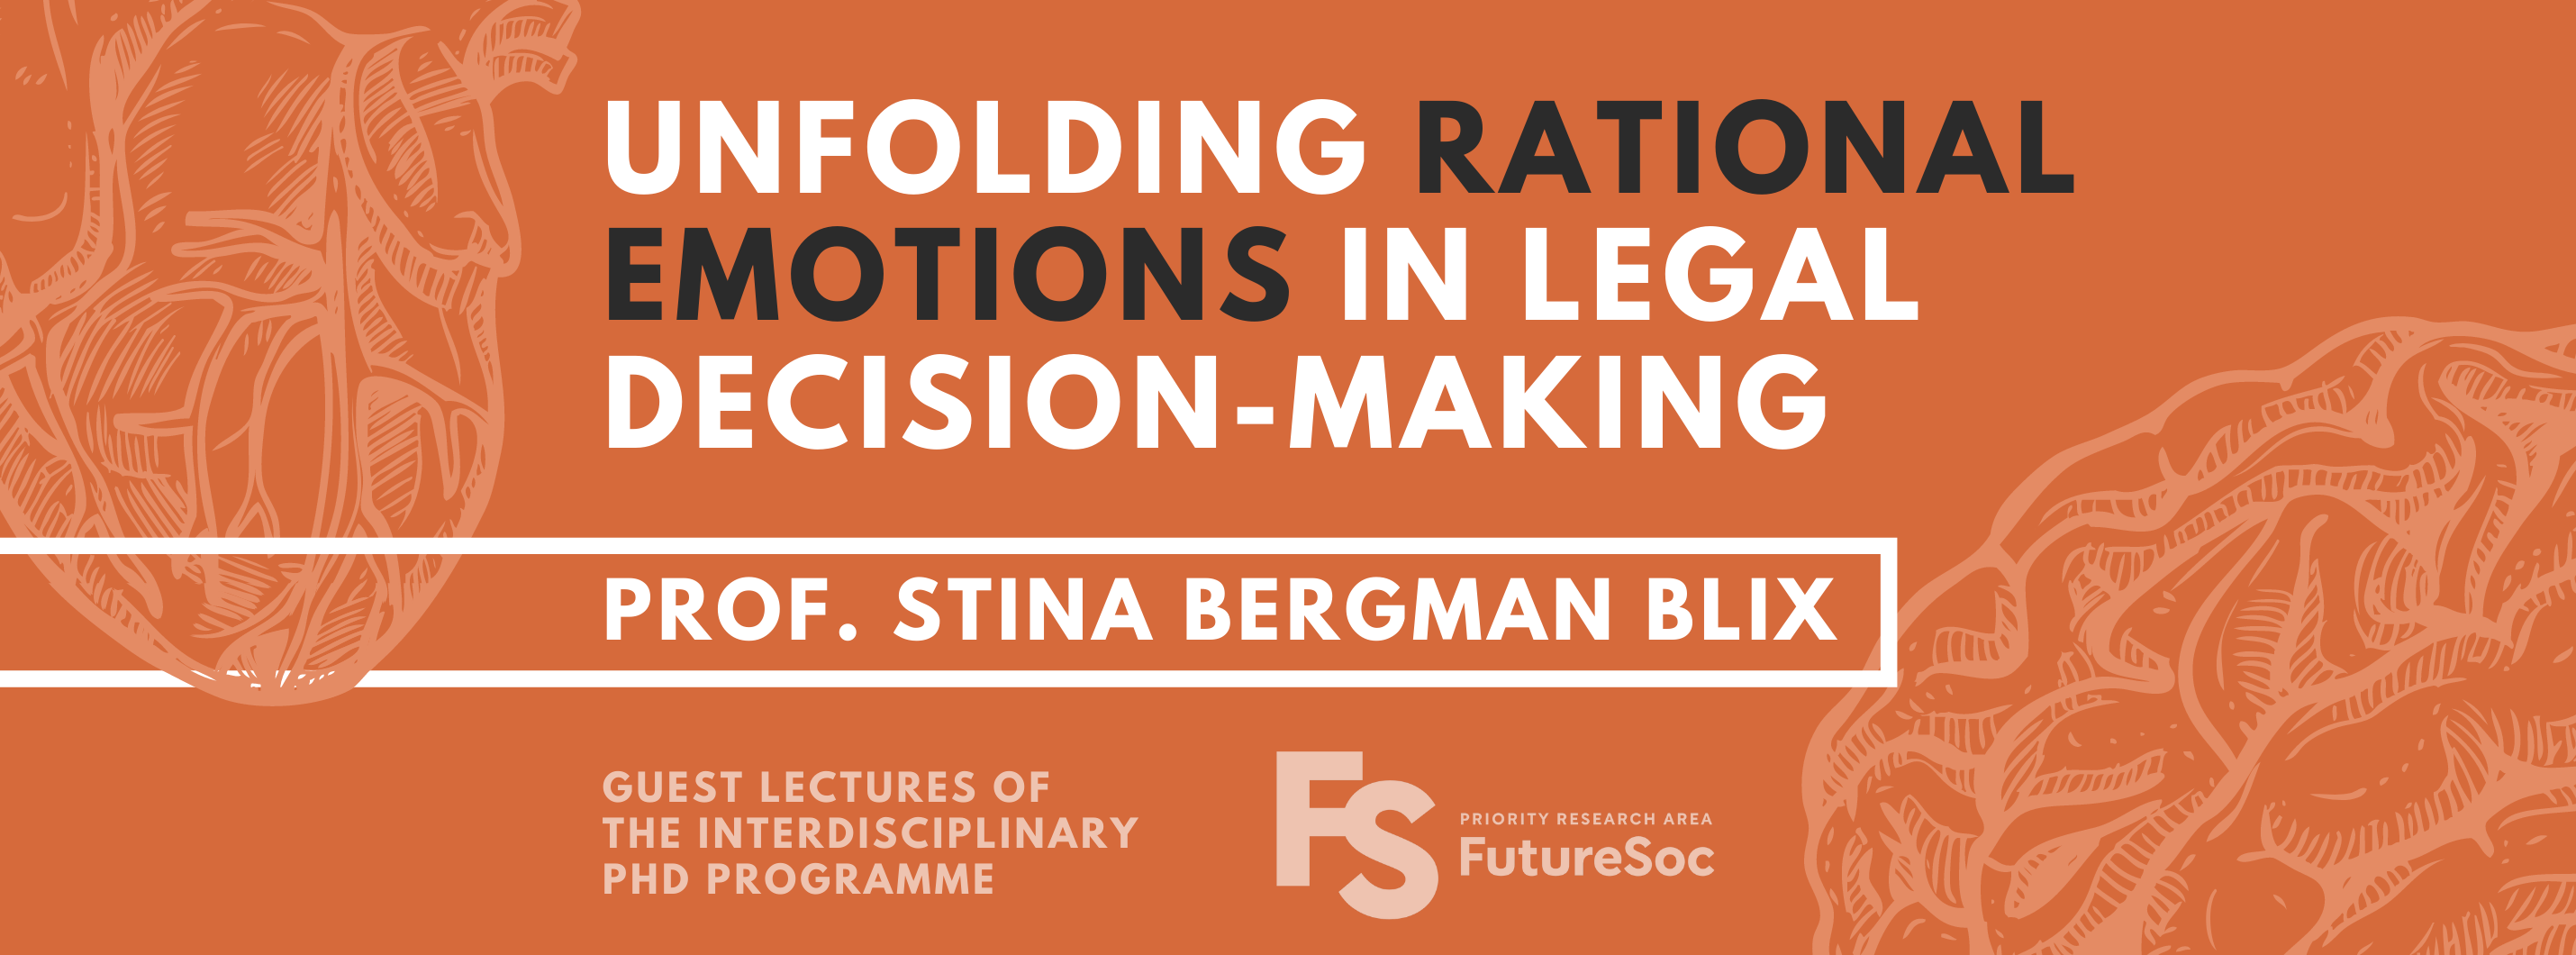 Promotional graphics for the lecture Stina Bergman Blix, "Unfolding Rational Emotions in Legal Decision-Making", with logo of PRA FutureSoc